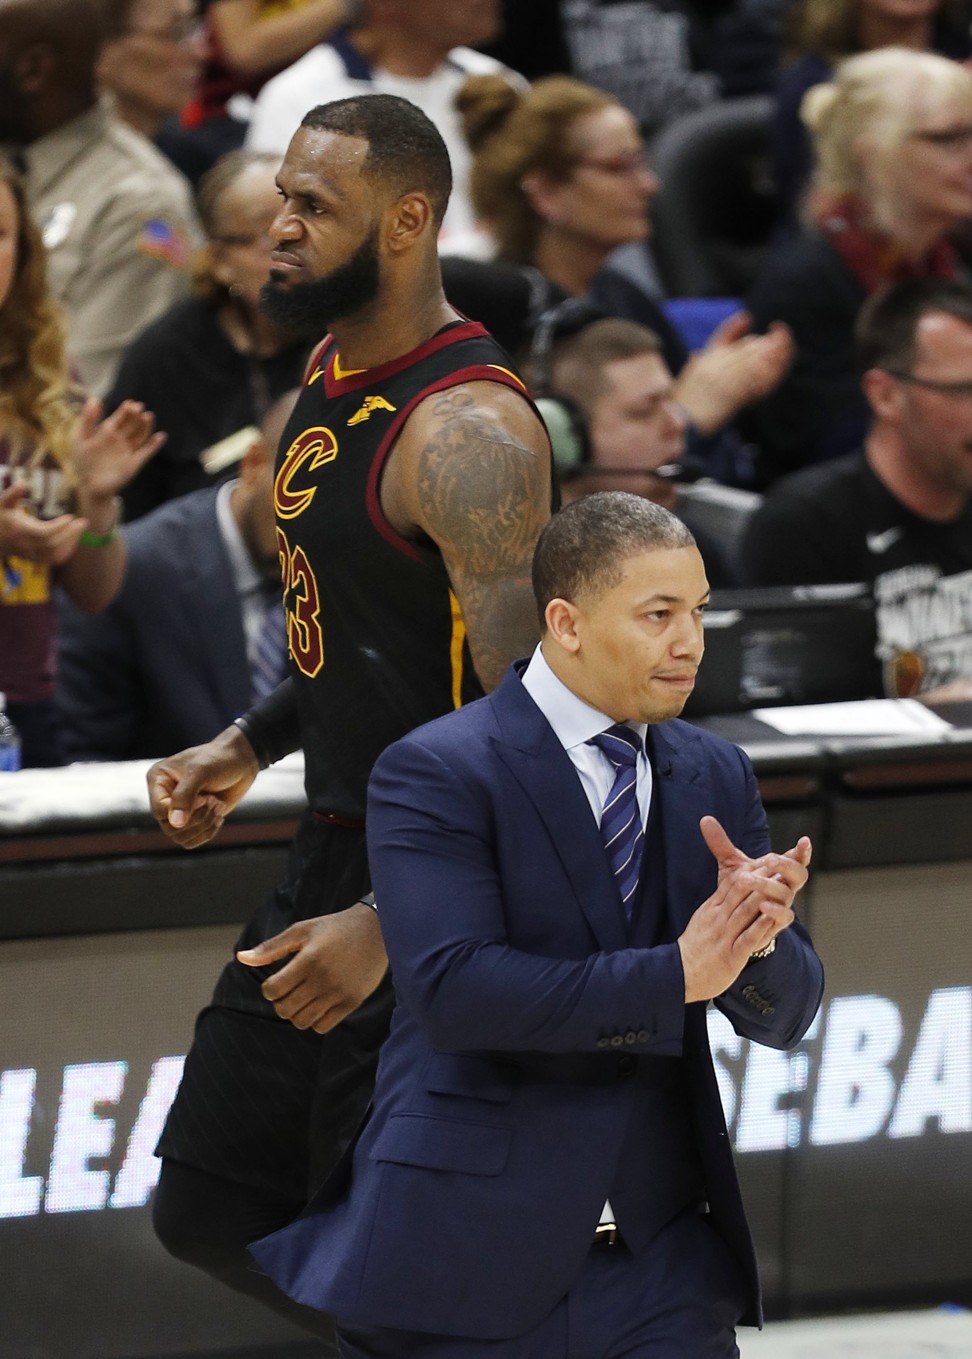 Cavaliers head coach Tyronn Lue walks on the court as LeBron James heads to the bench during the second half. Photo: EPA